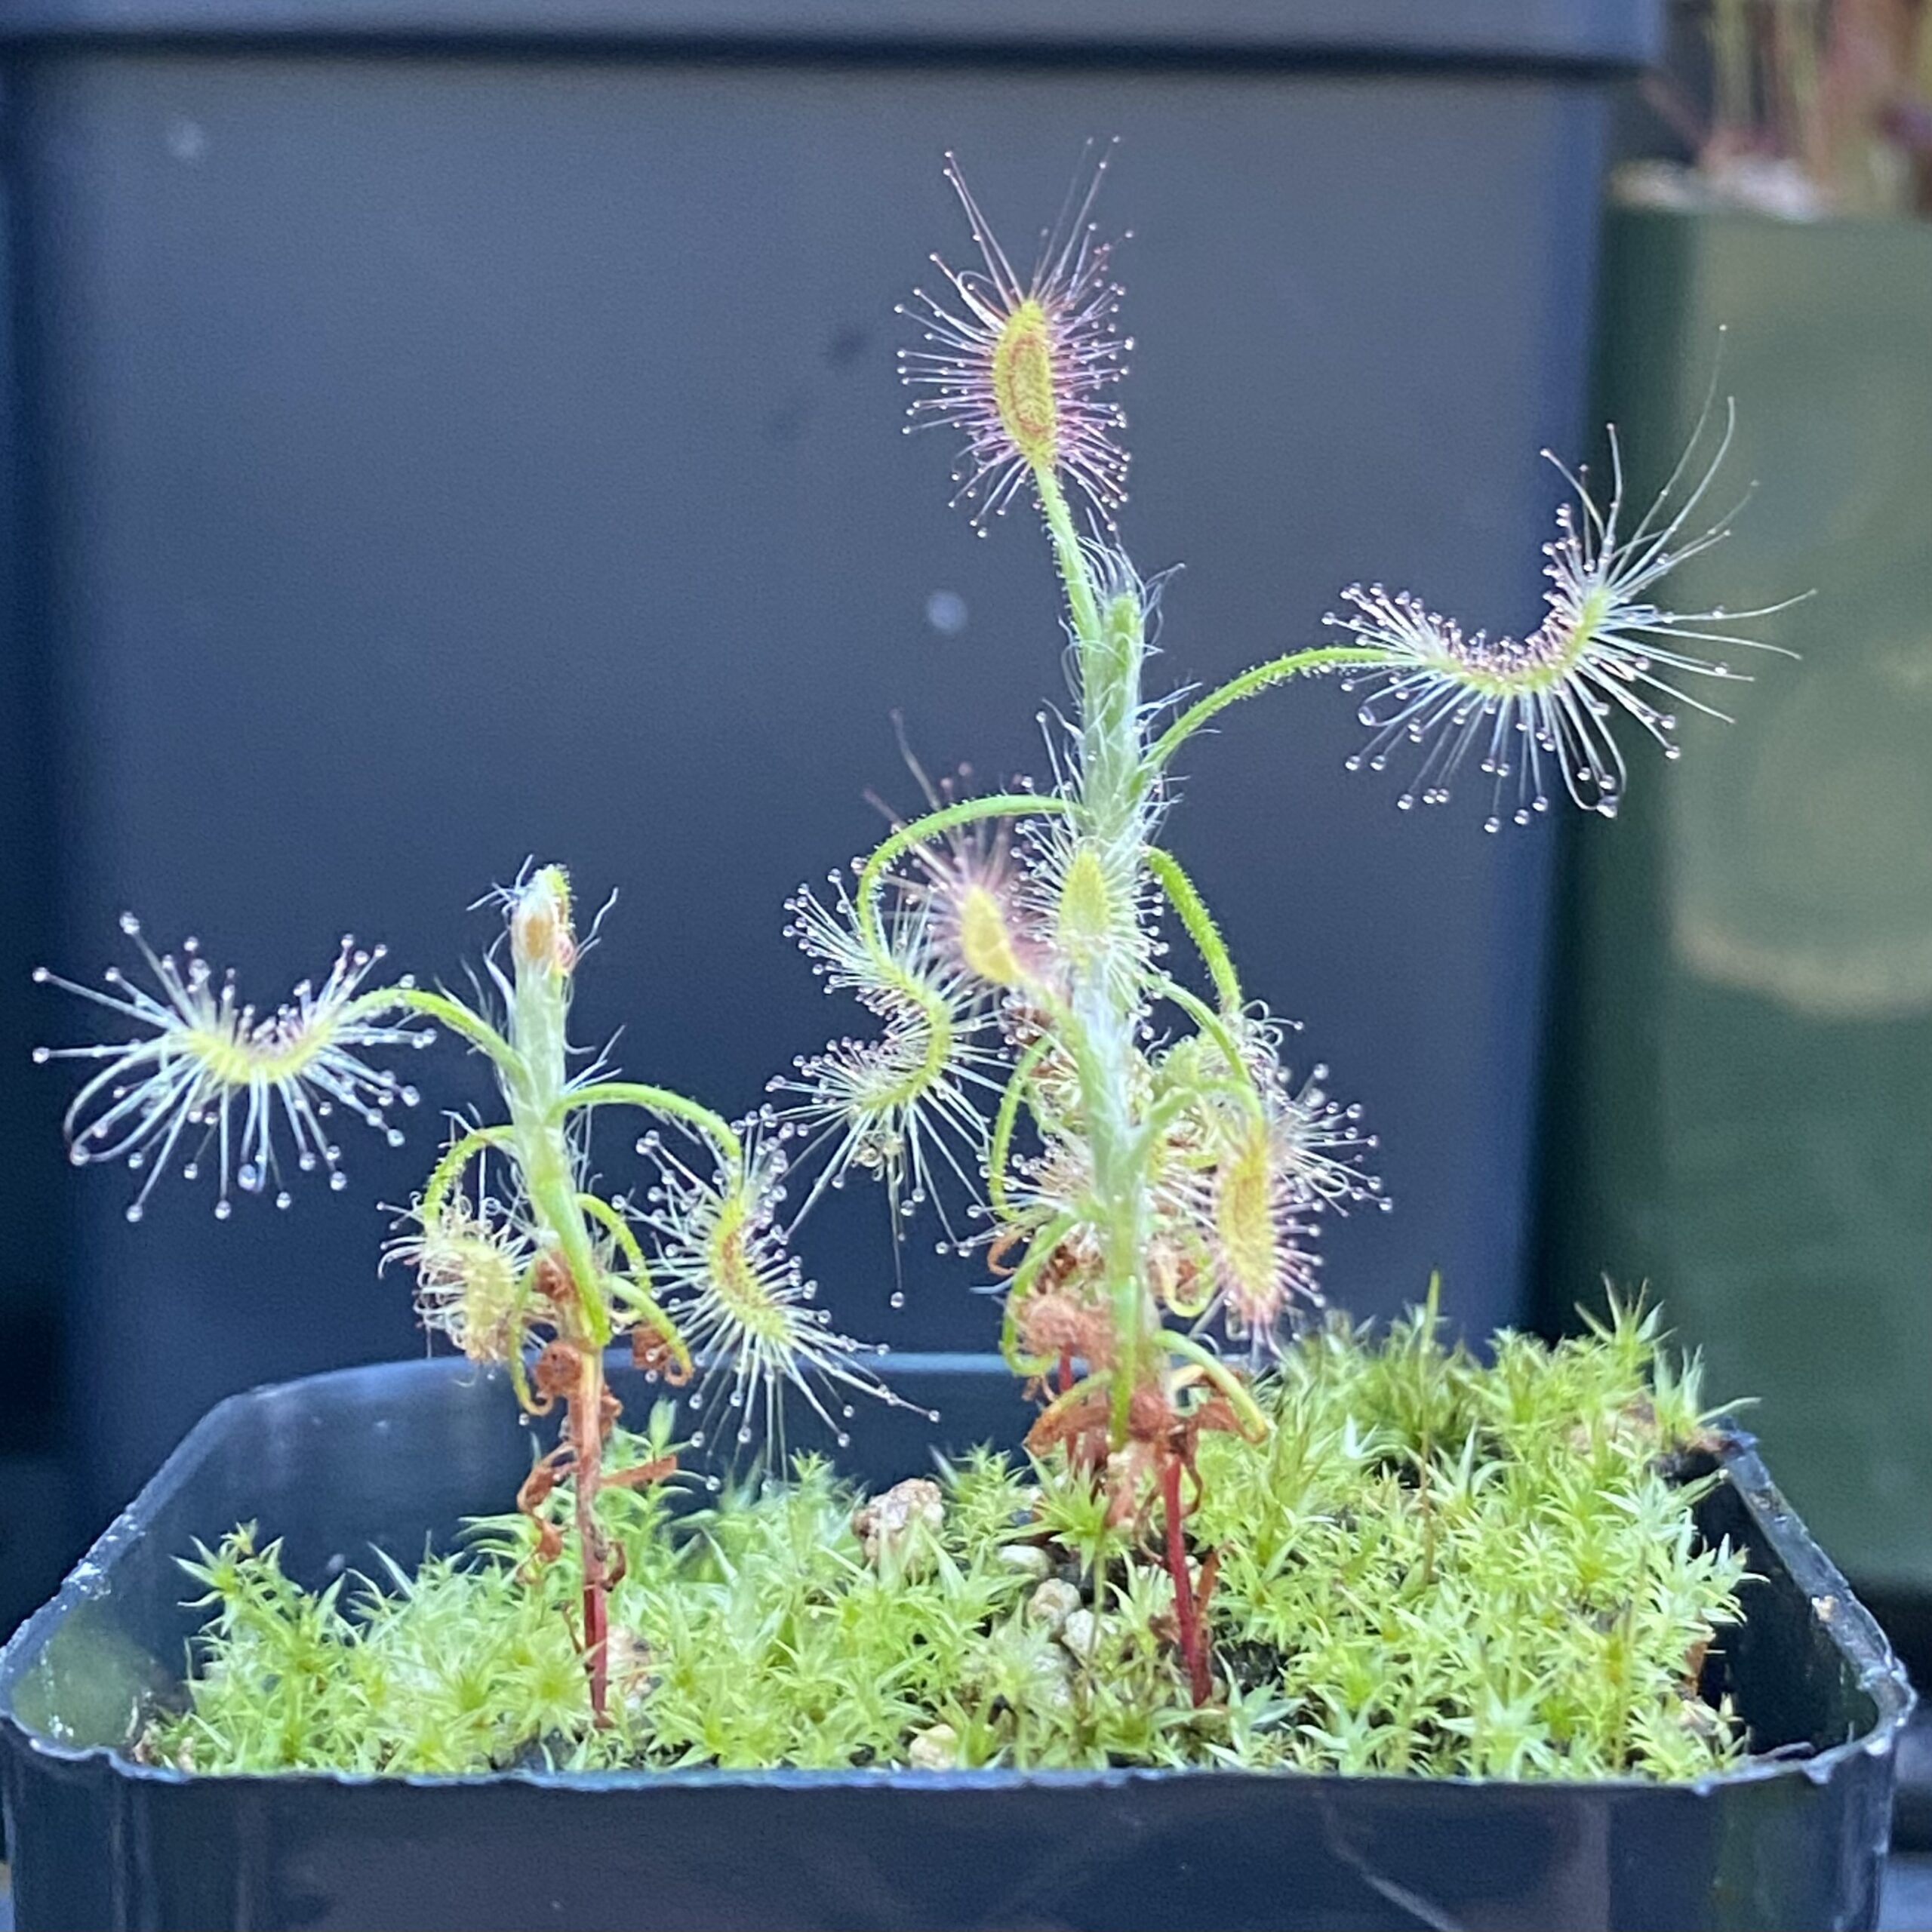 A Drosera scorpioides plant in a black container